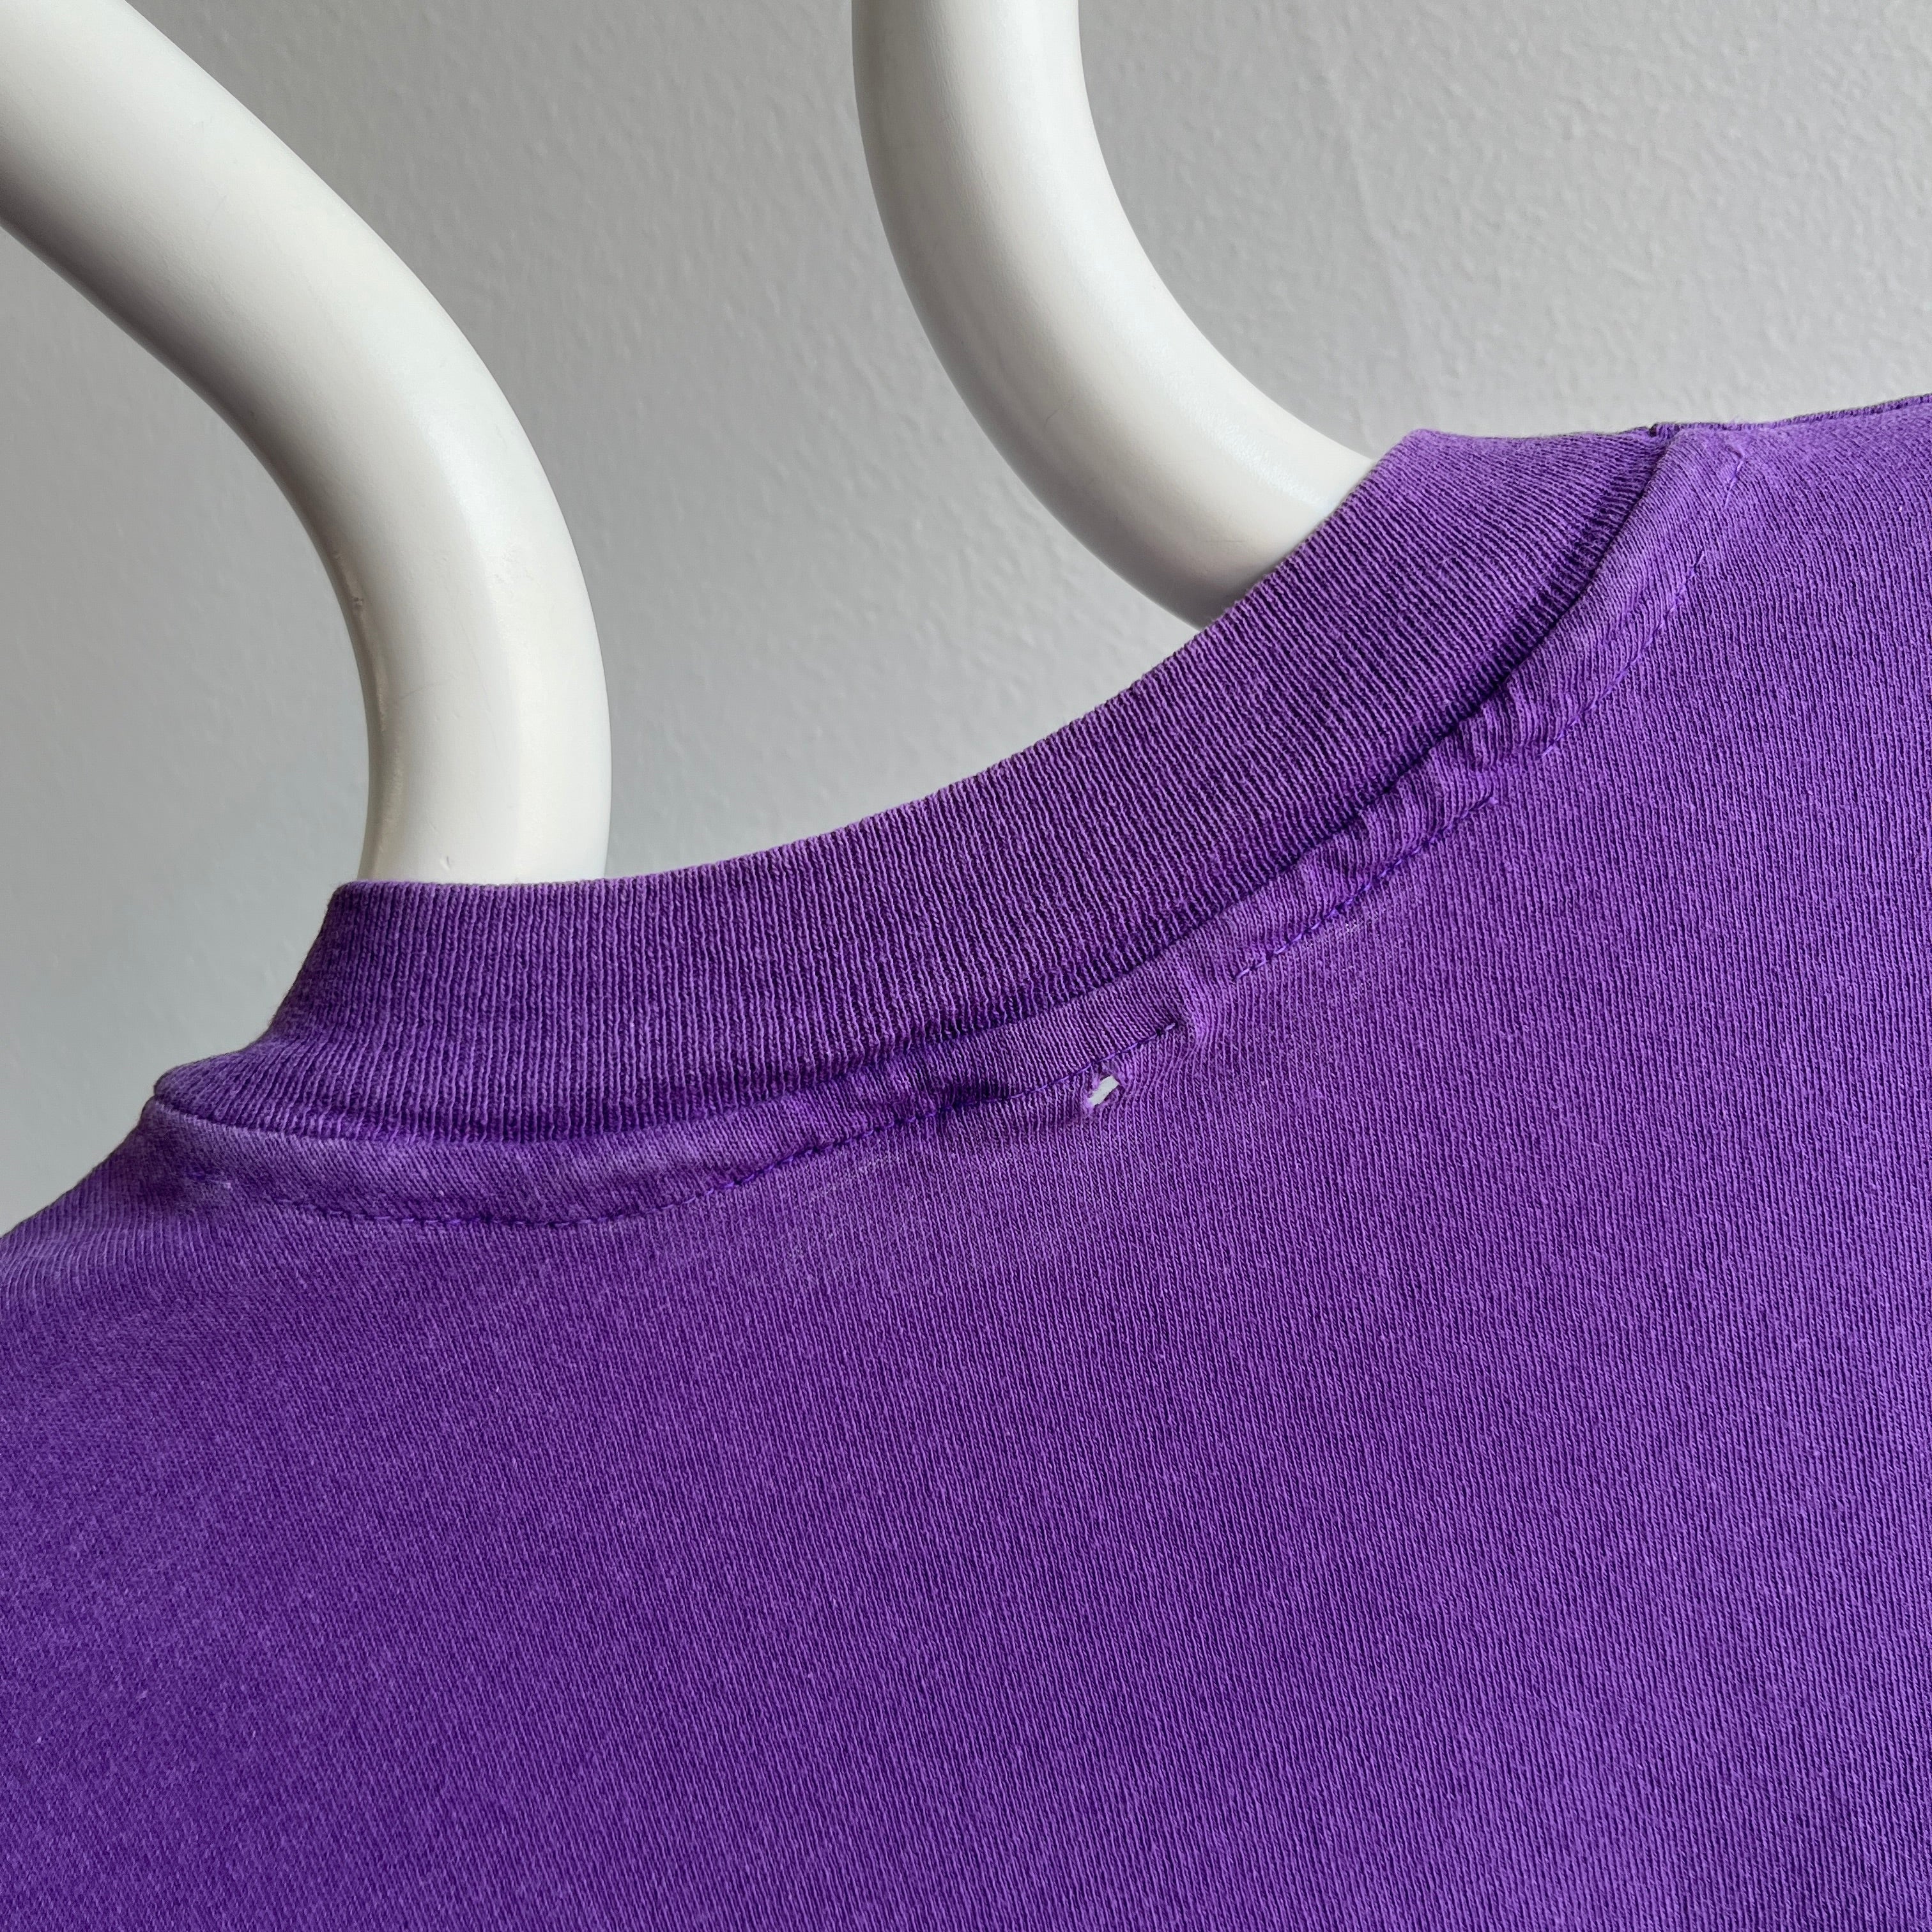 1980s Blank Purple Cotton T-Shirt with a Wabi Sabi Bleach Stain by Spruce